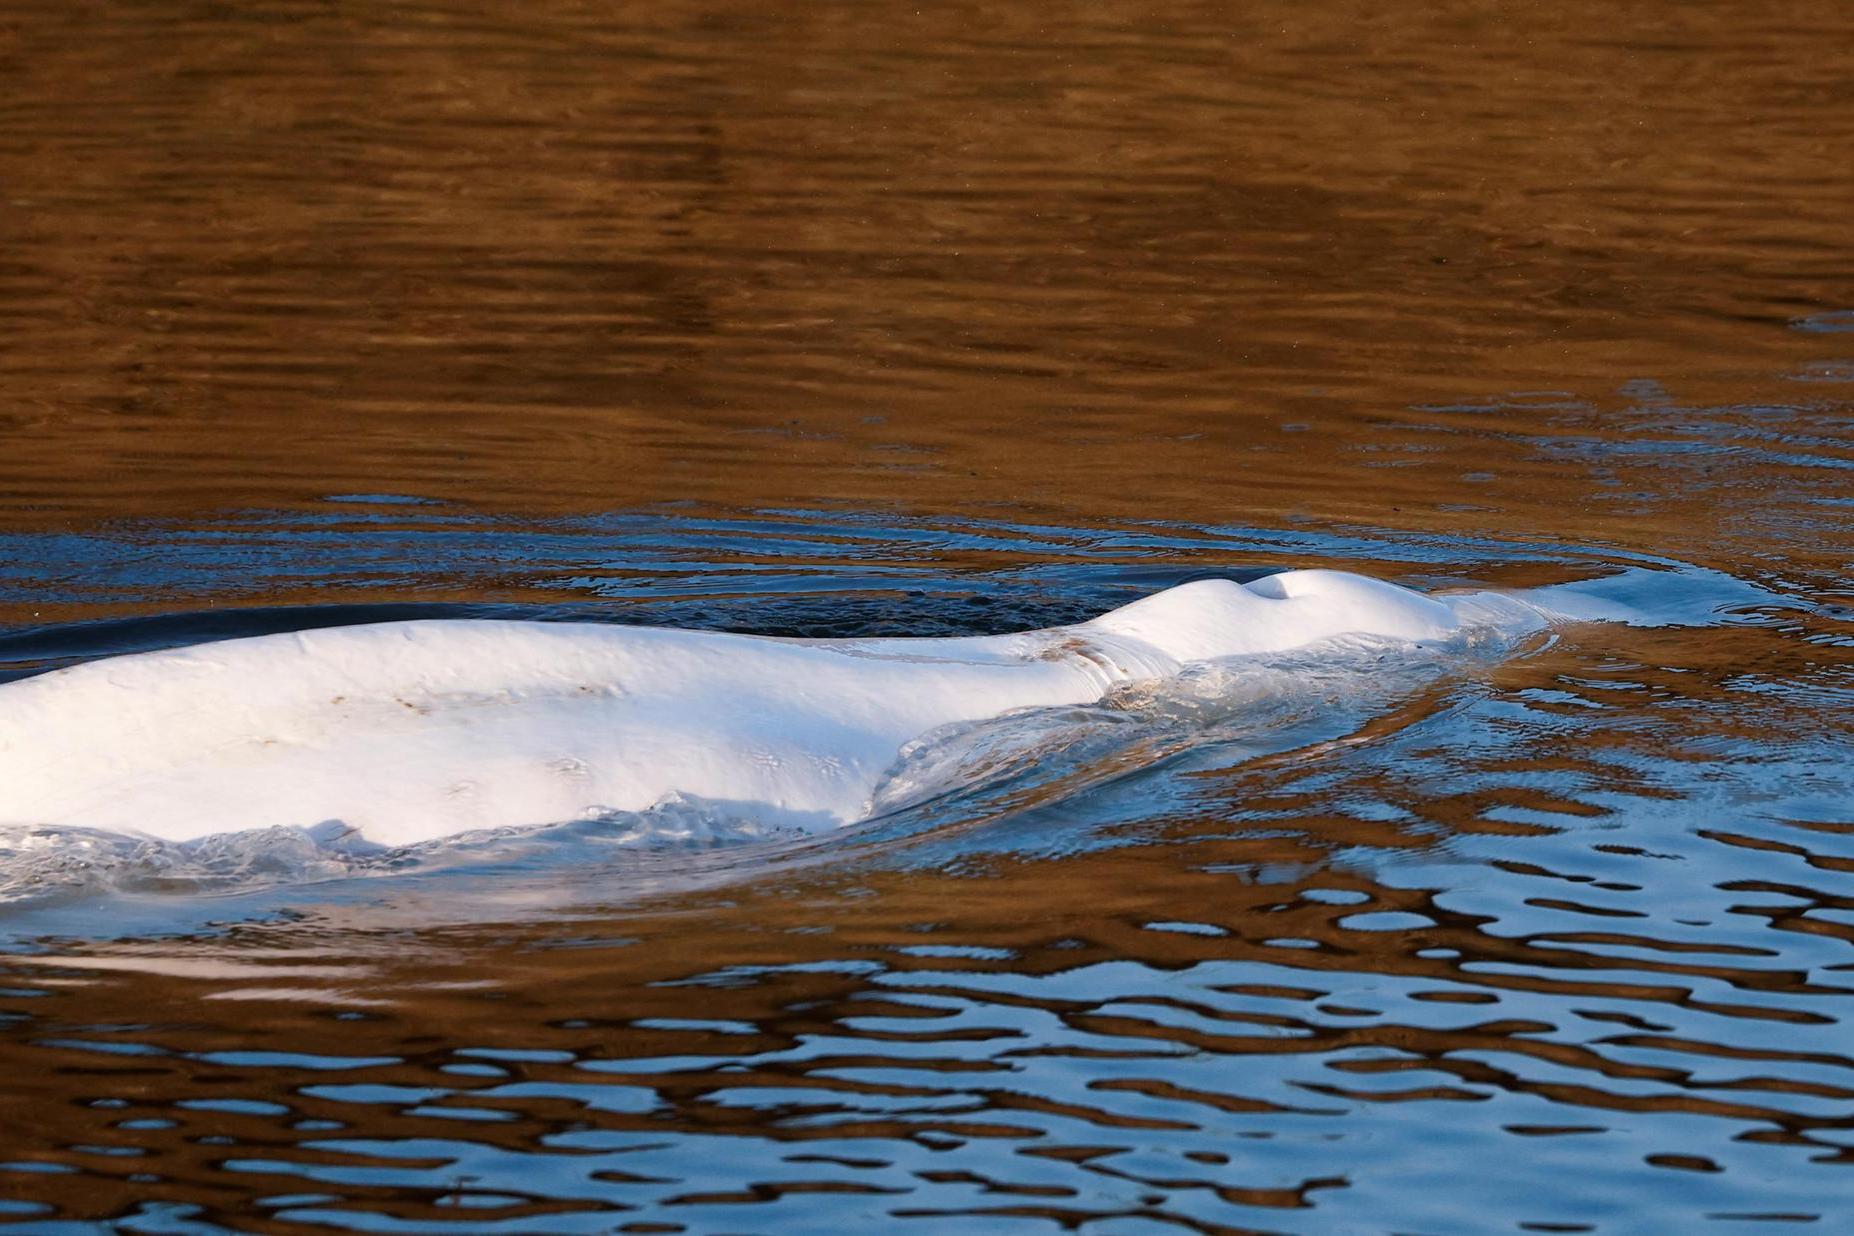 Beluga extracted from the Seine is dead